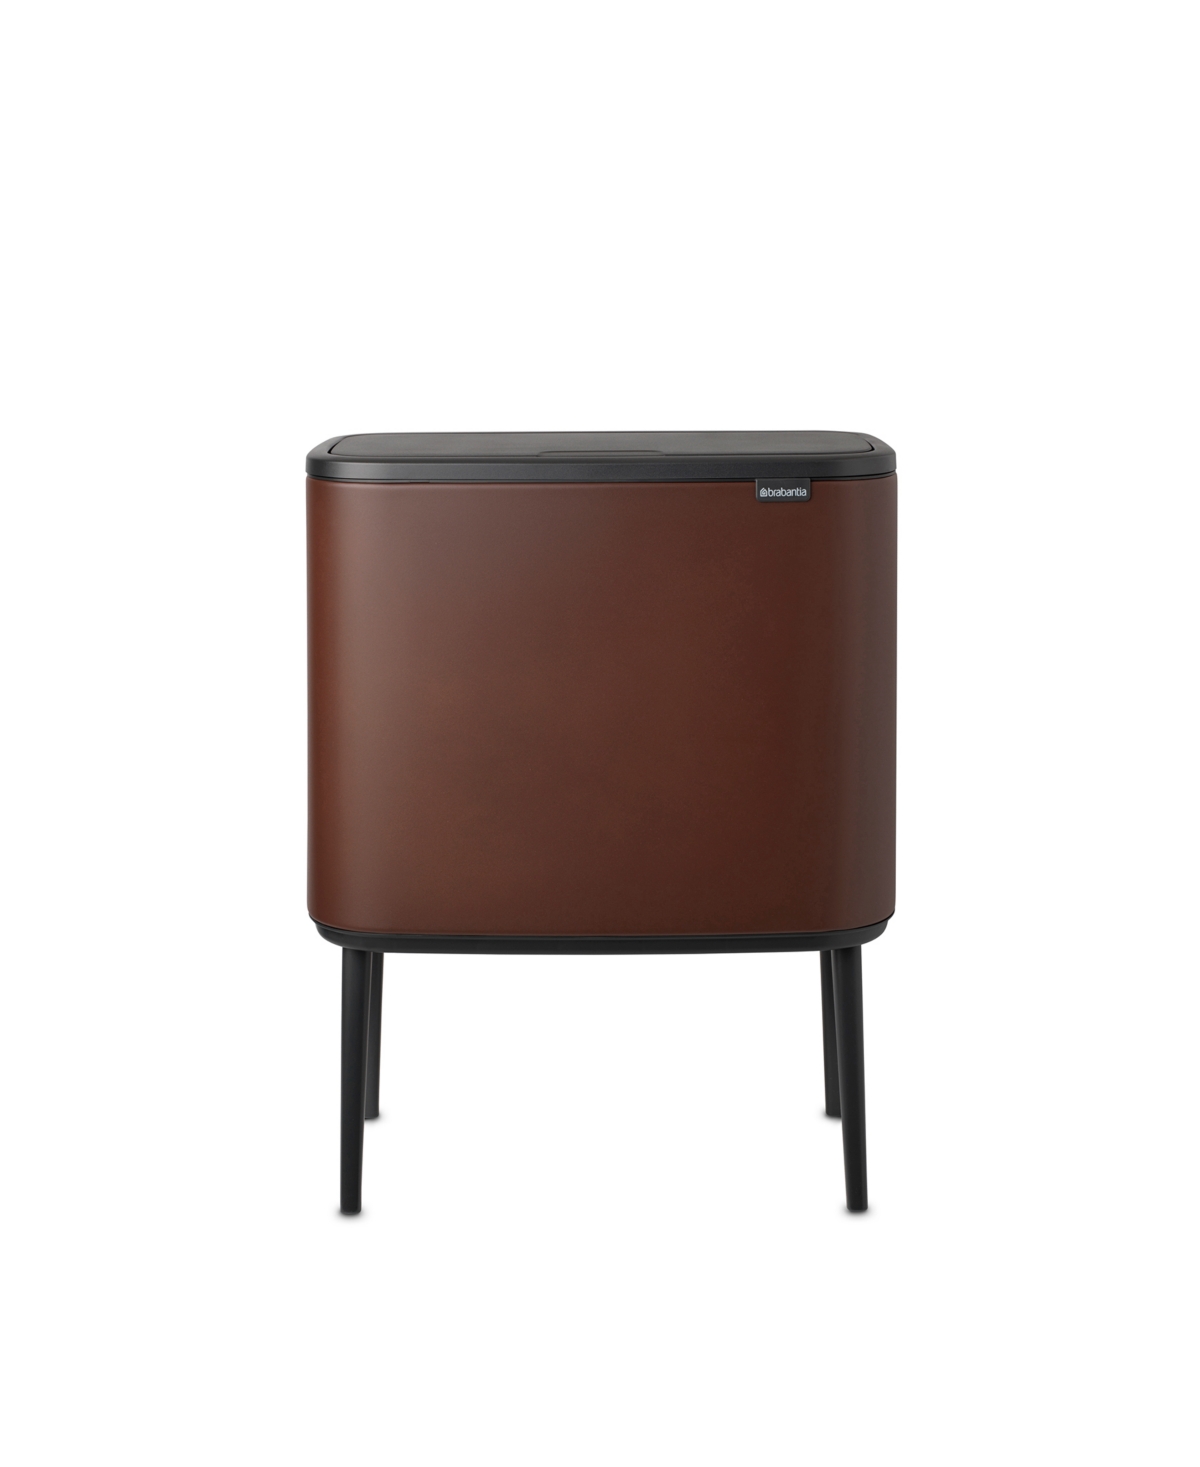 Bo Touch Top Dual Compartment Trash Can, 3 plus 6 Gallon, 11 plus 23 Liter - Mineral Cosy Brown